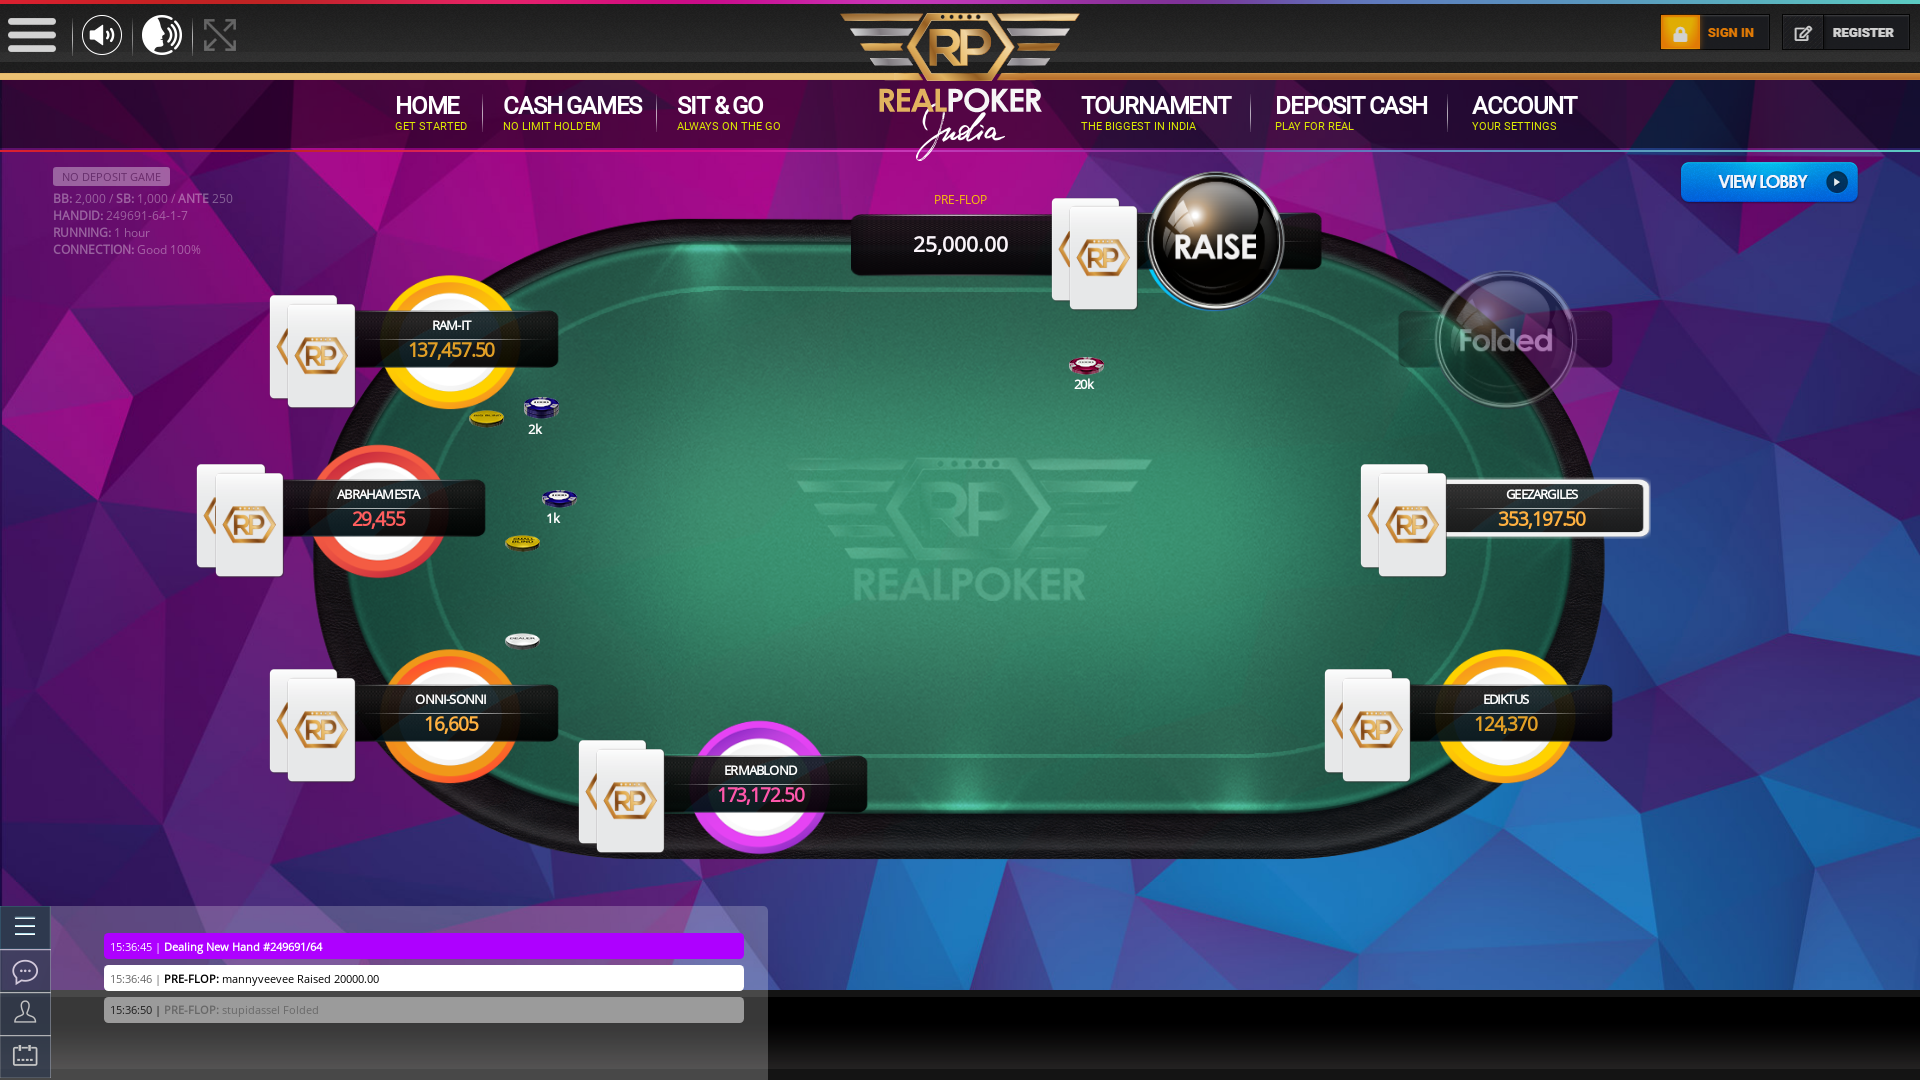 Real poker 10 player table in the 64th minute of the match